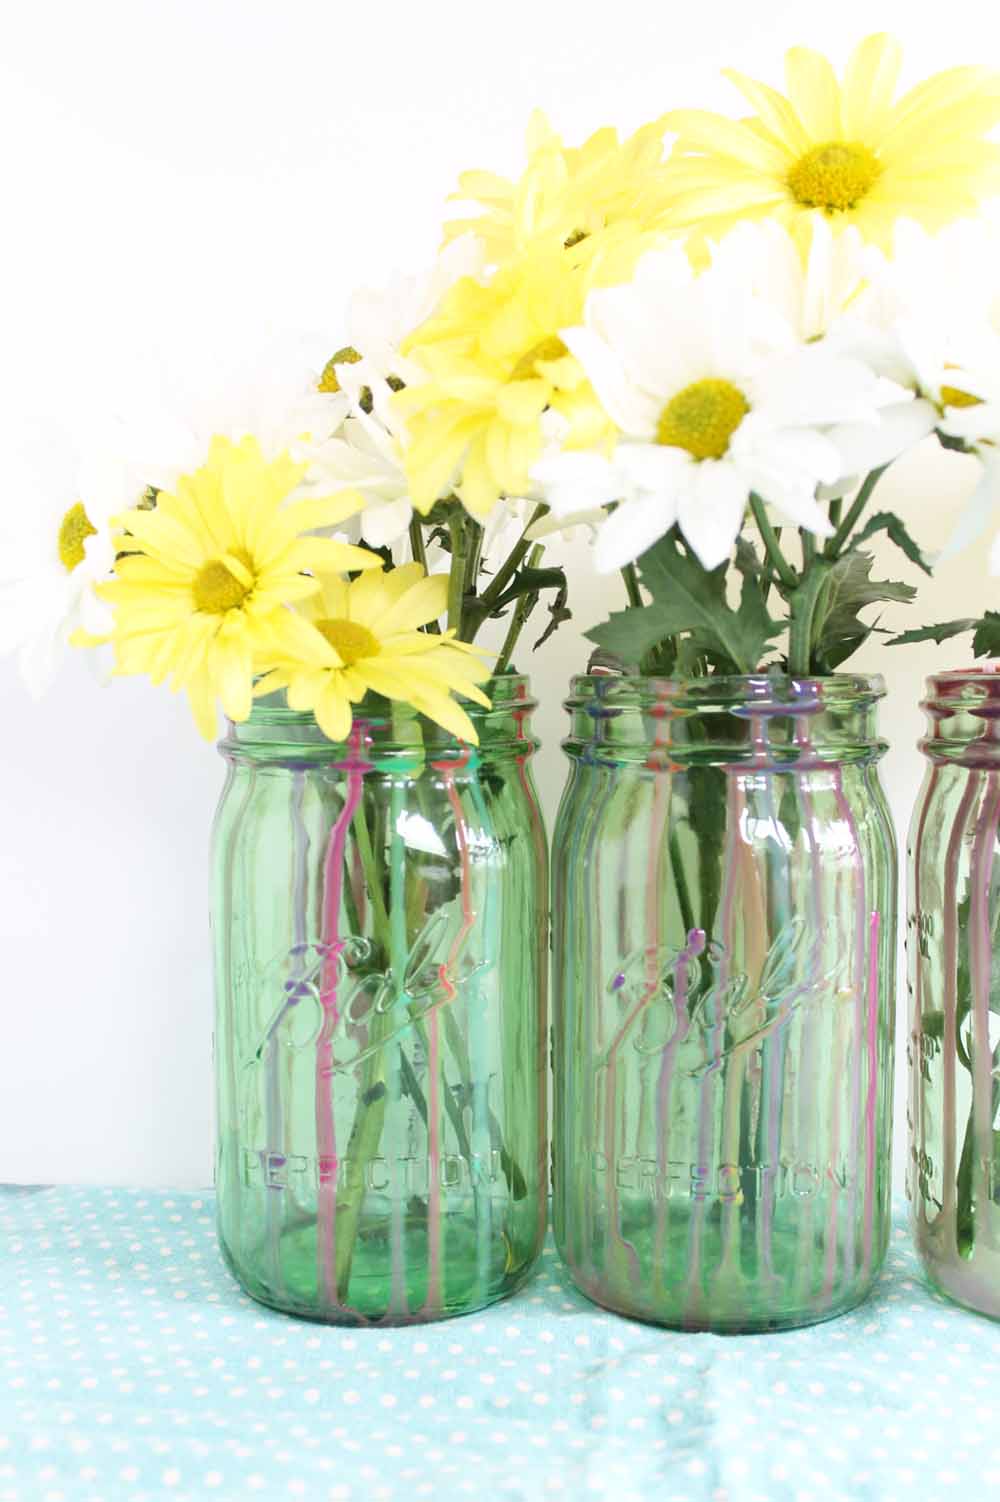 finished resin mason jar project with flowers in jars